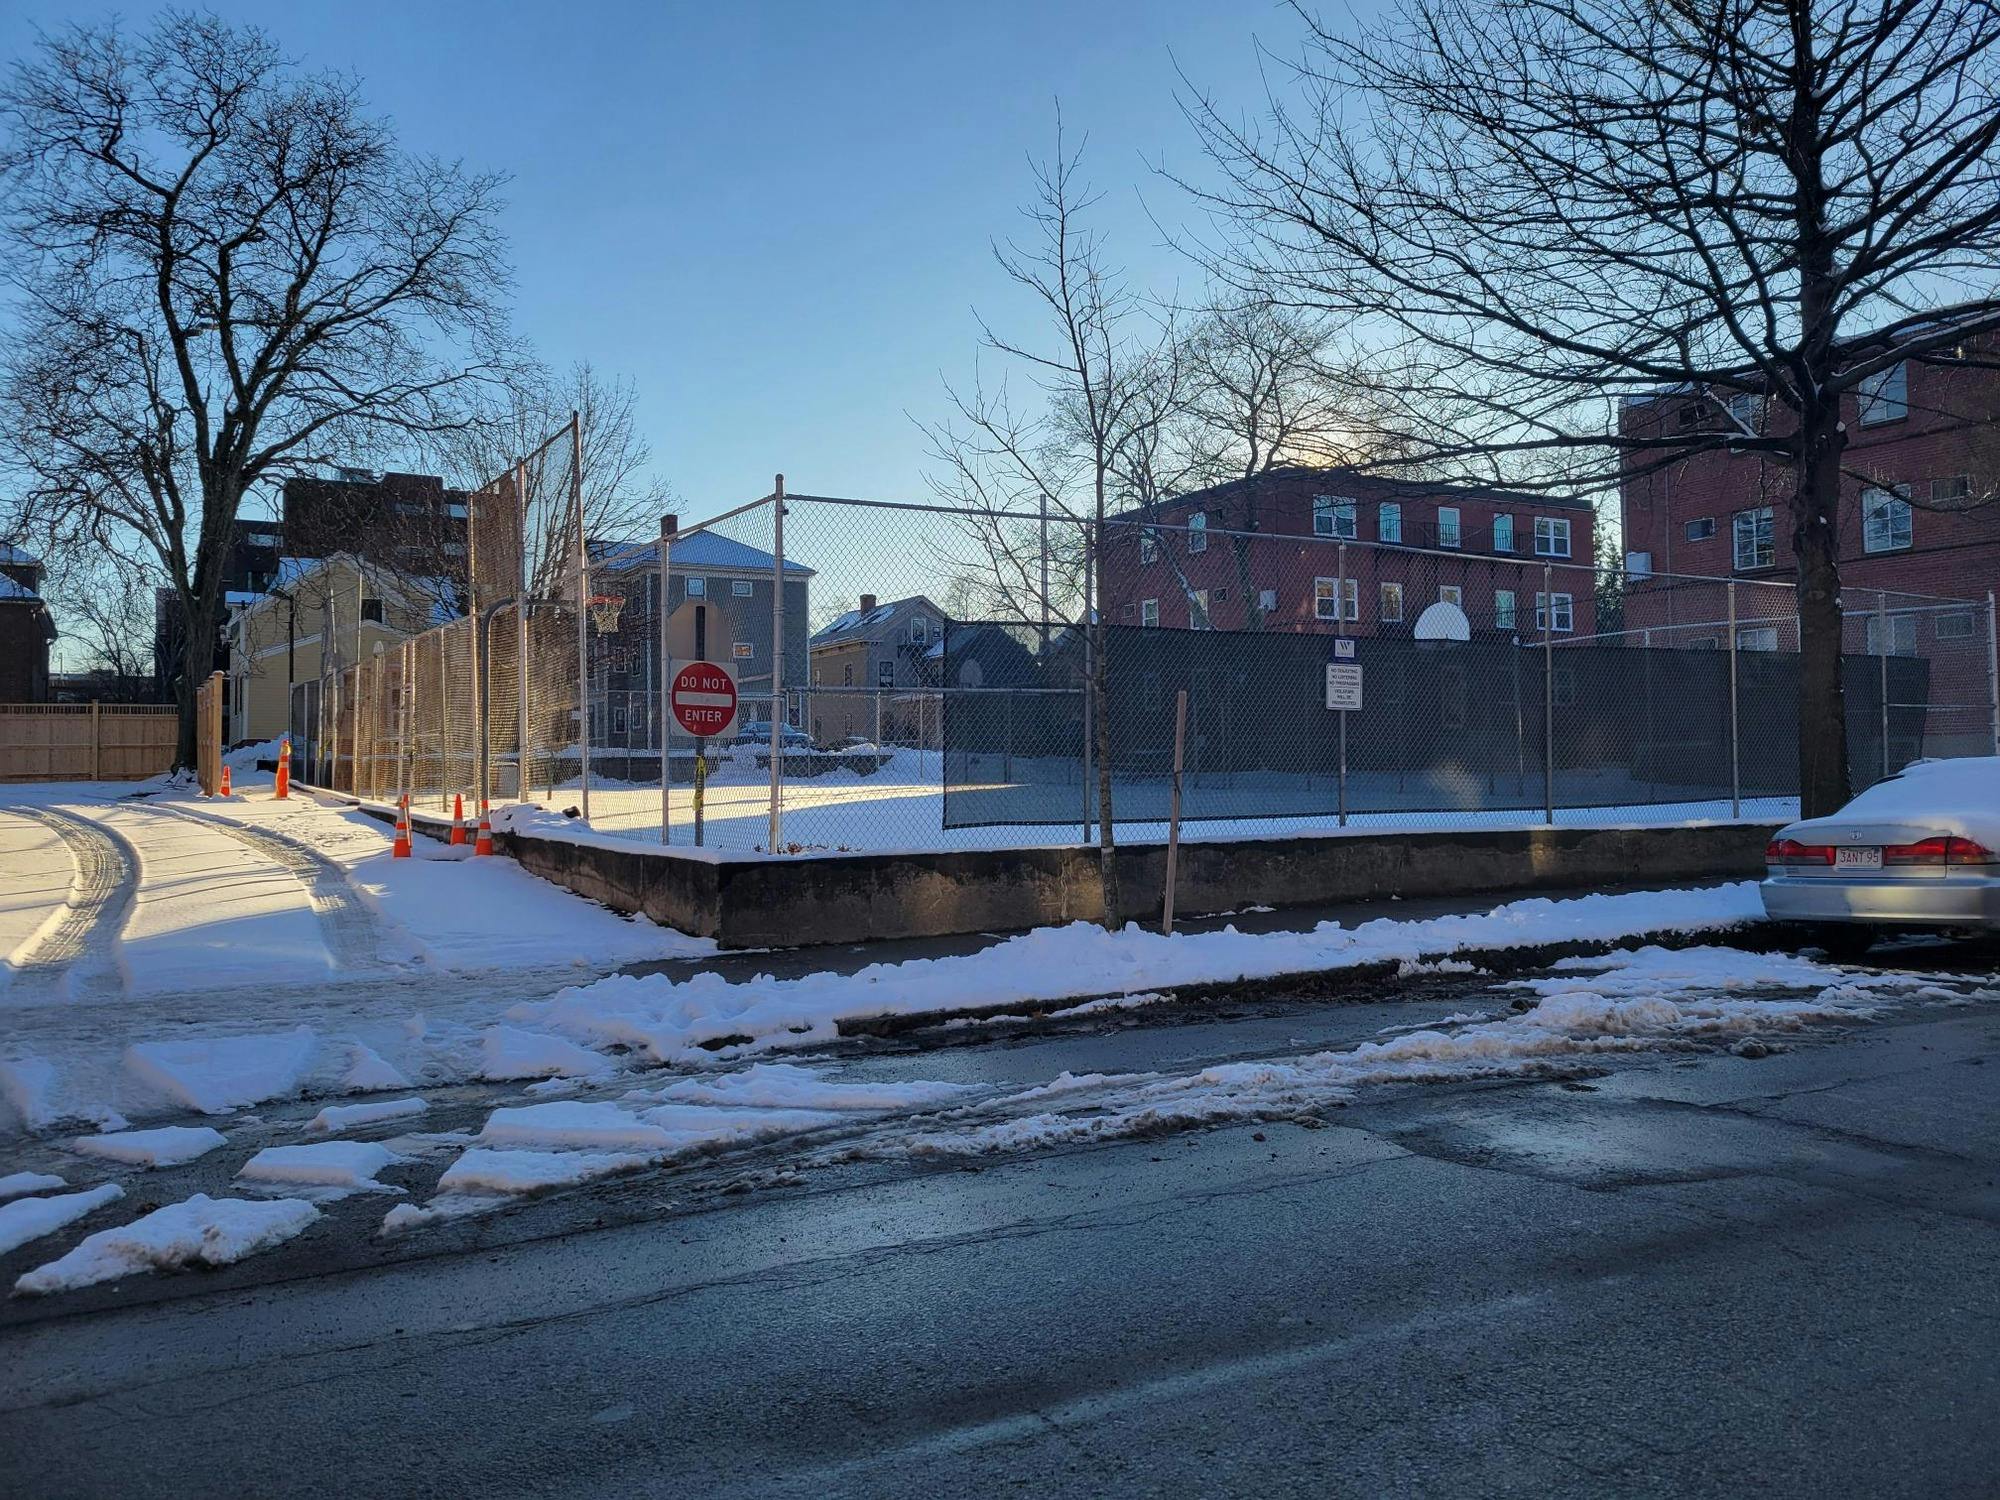 30 Wendell Street Site with snow on tennis court